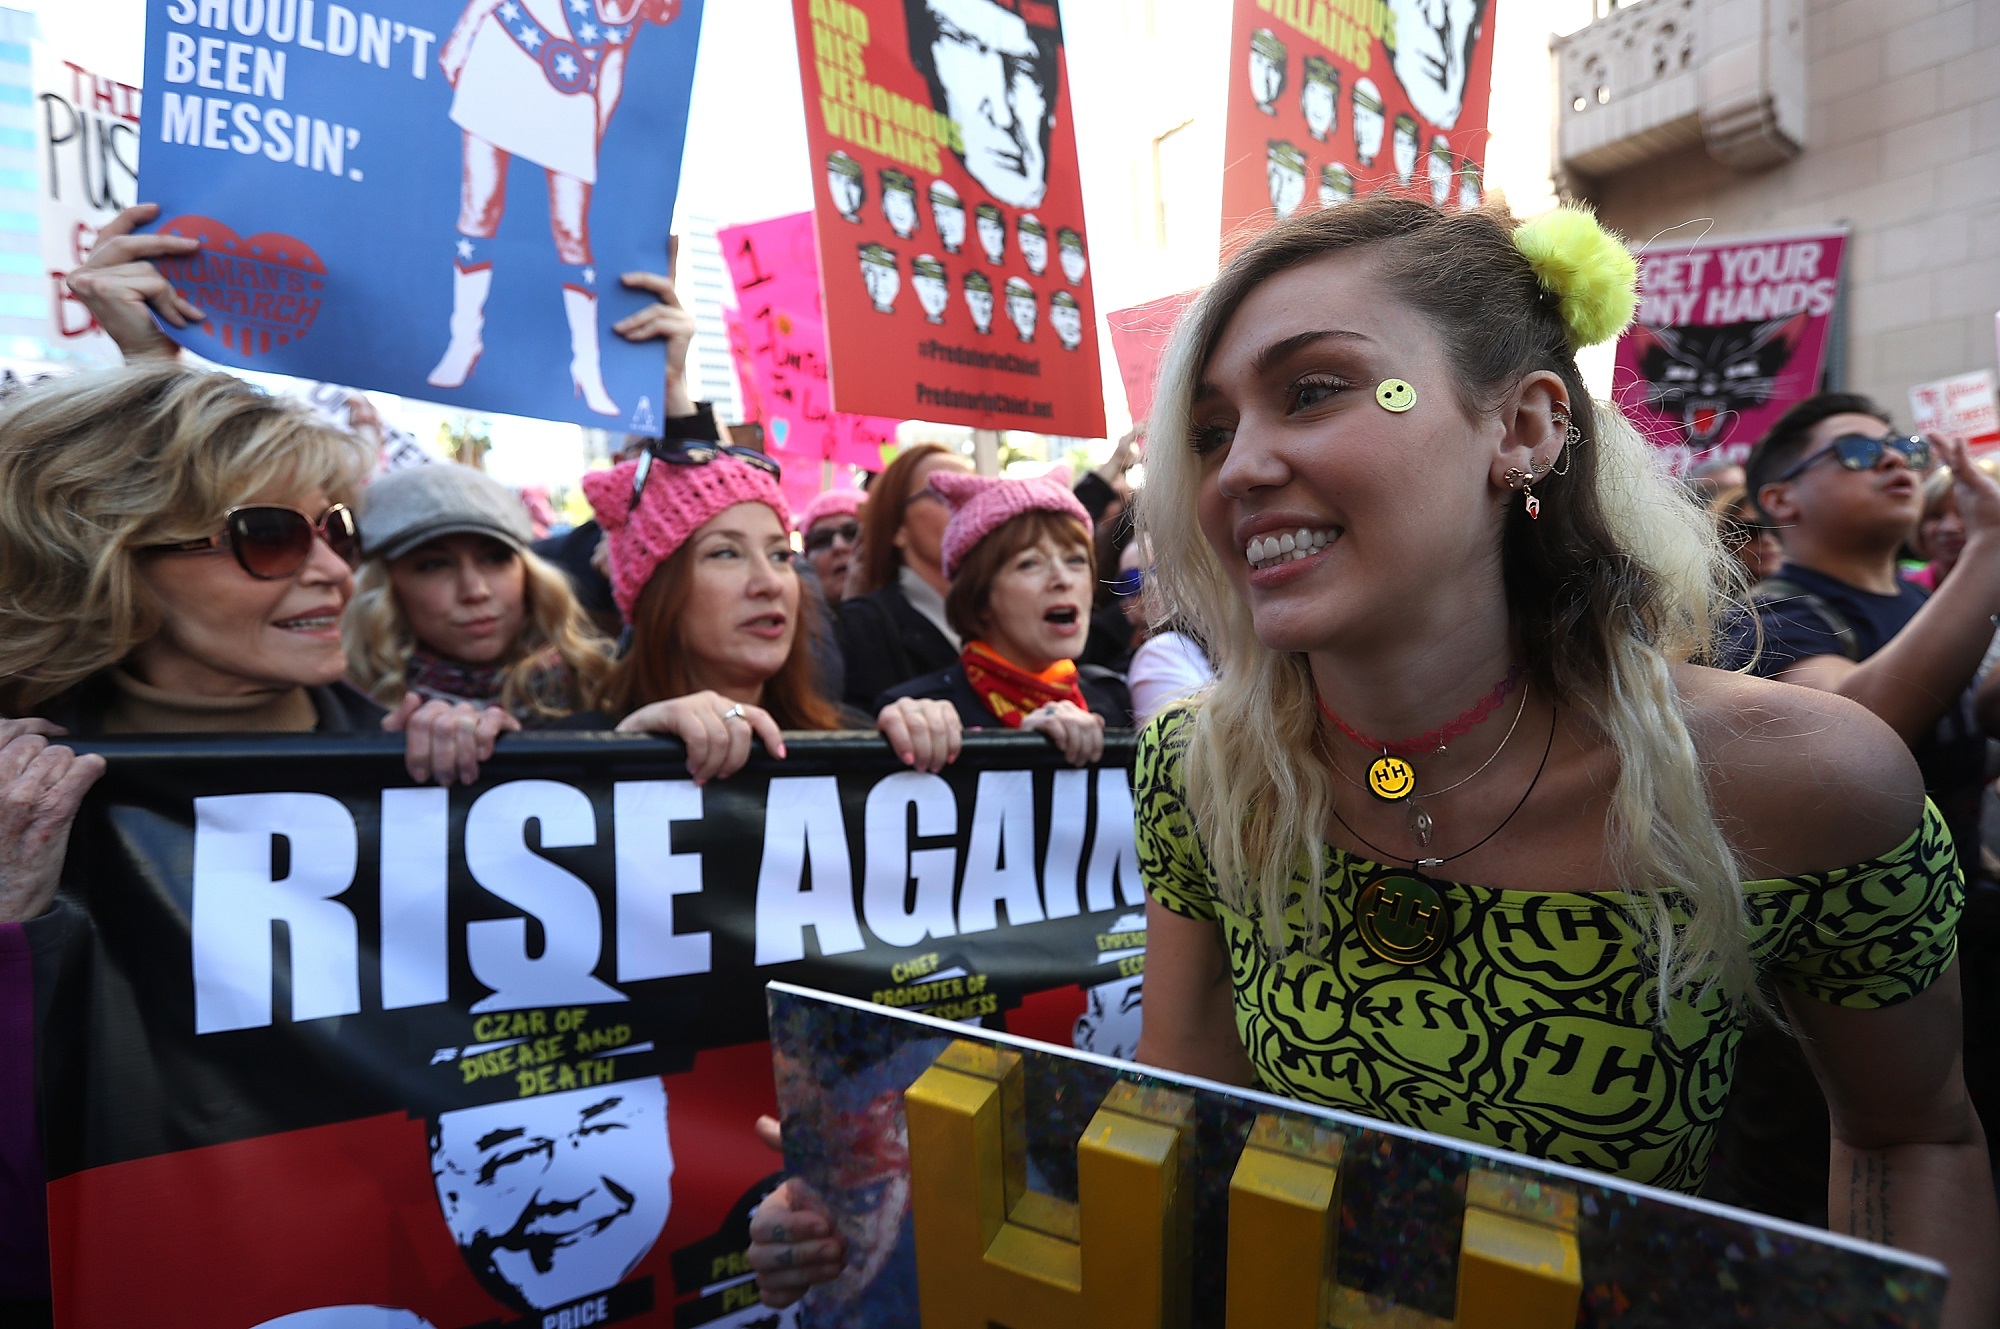 Miley Cyrus (R) marches during the Women's March on January 21, 2017, in Los Angeles, California.  Tens of thousands of people took to the streets of Downtown Los Angeles for the Women's March in protest after the inauguration of President Donald Trump.